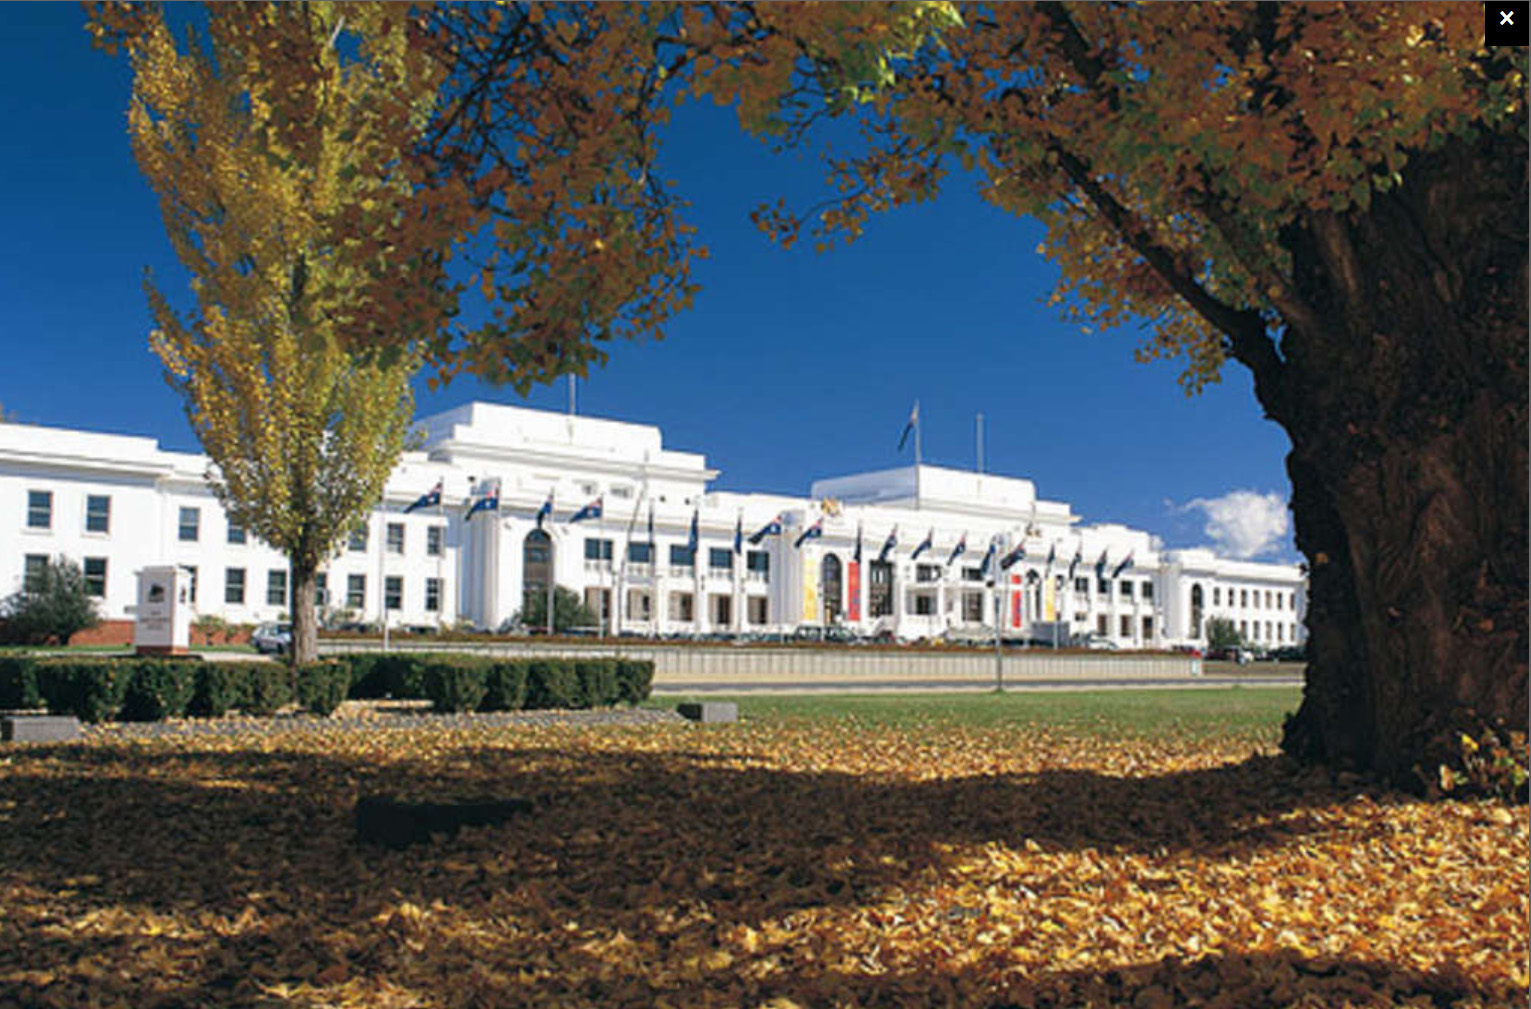 Old Parliament House, Museum of Australian Democracy